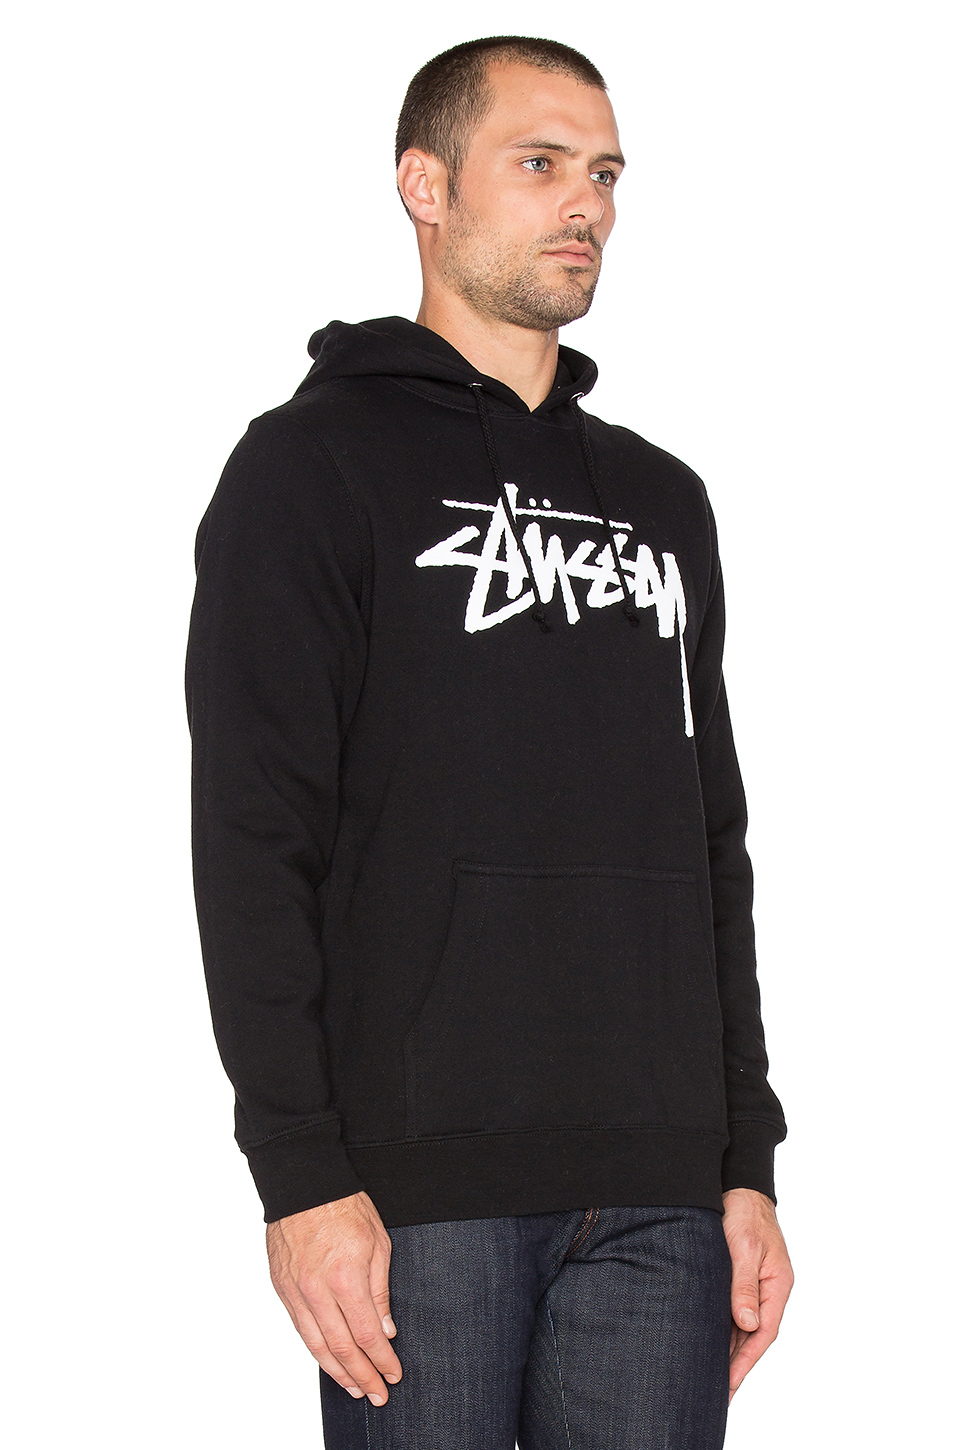 Stussy Cotton Stock Embroidered Hoodie in Black for Men - Lyst